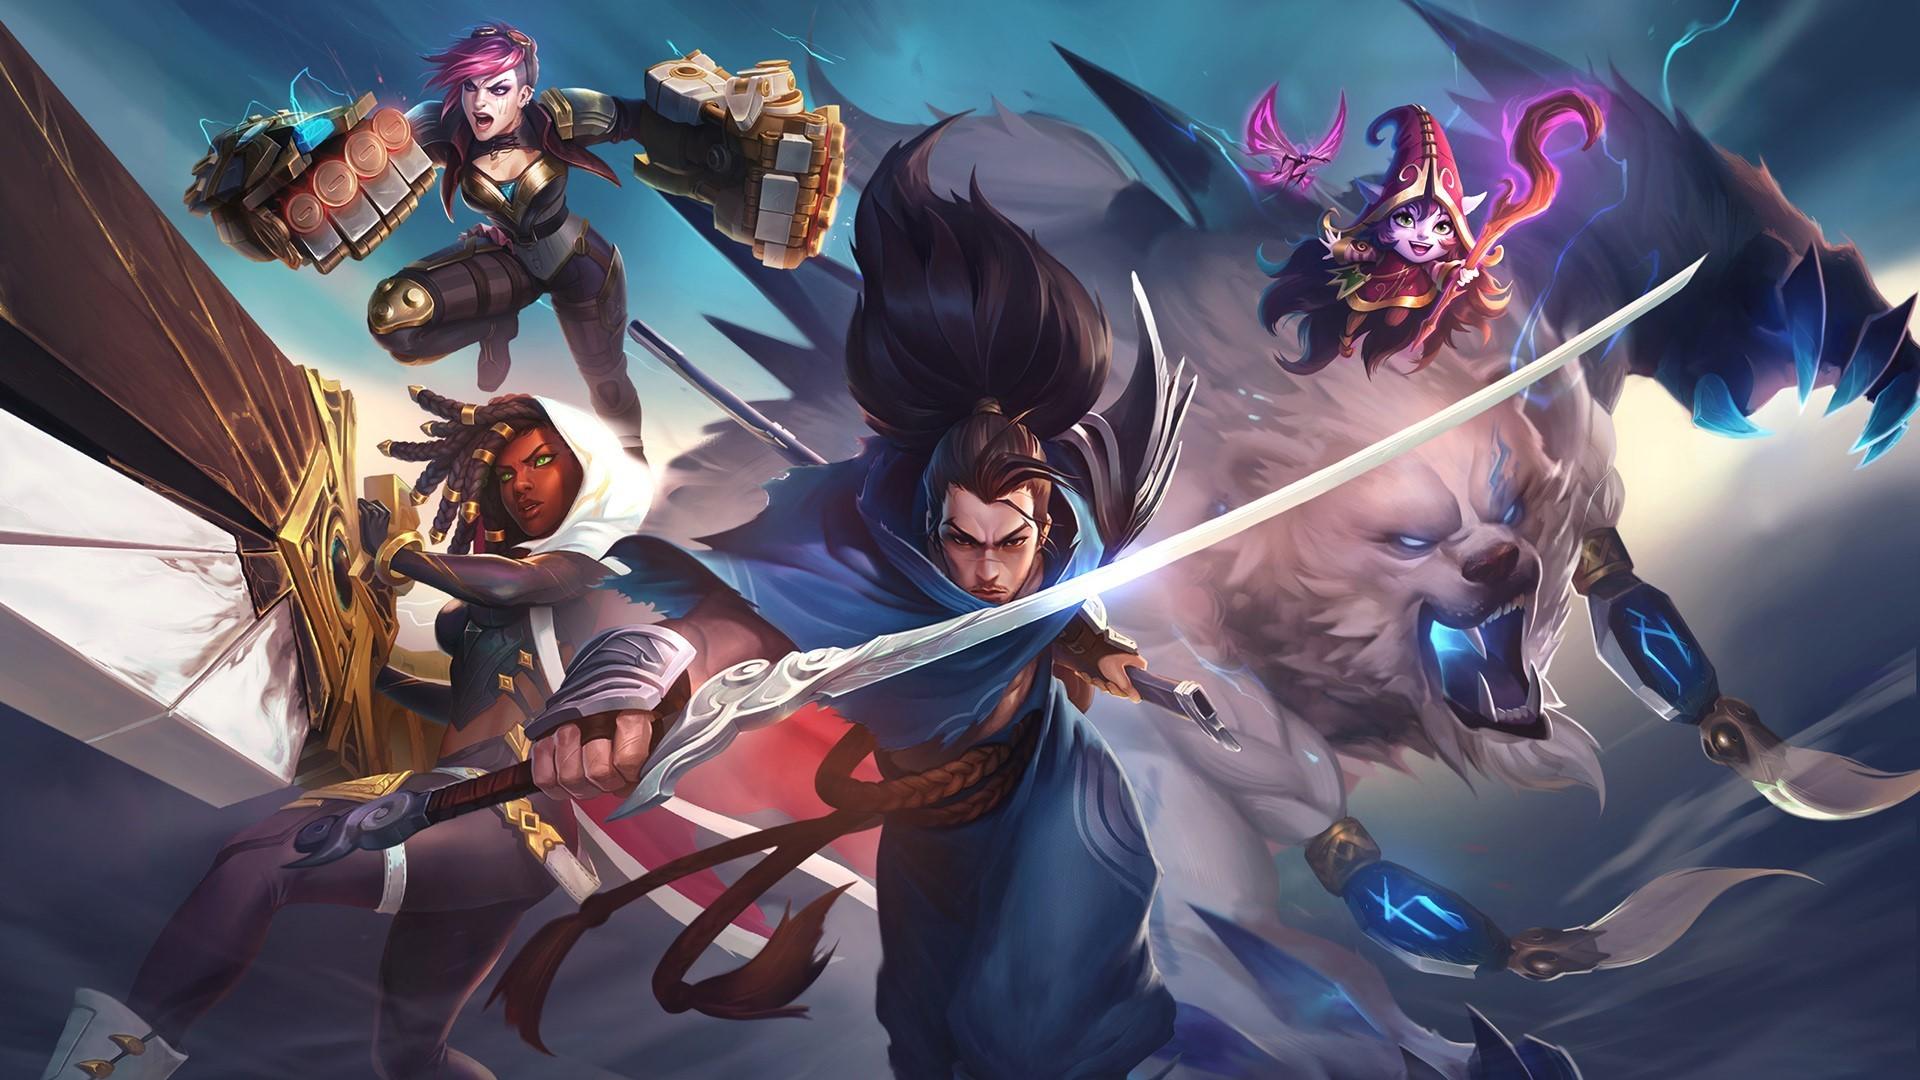 League of Legends and TFT to be Self-Published by Riot Games